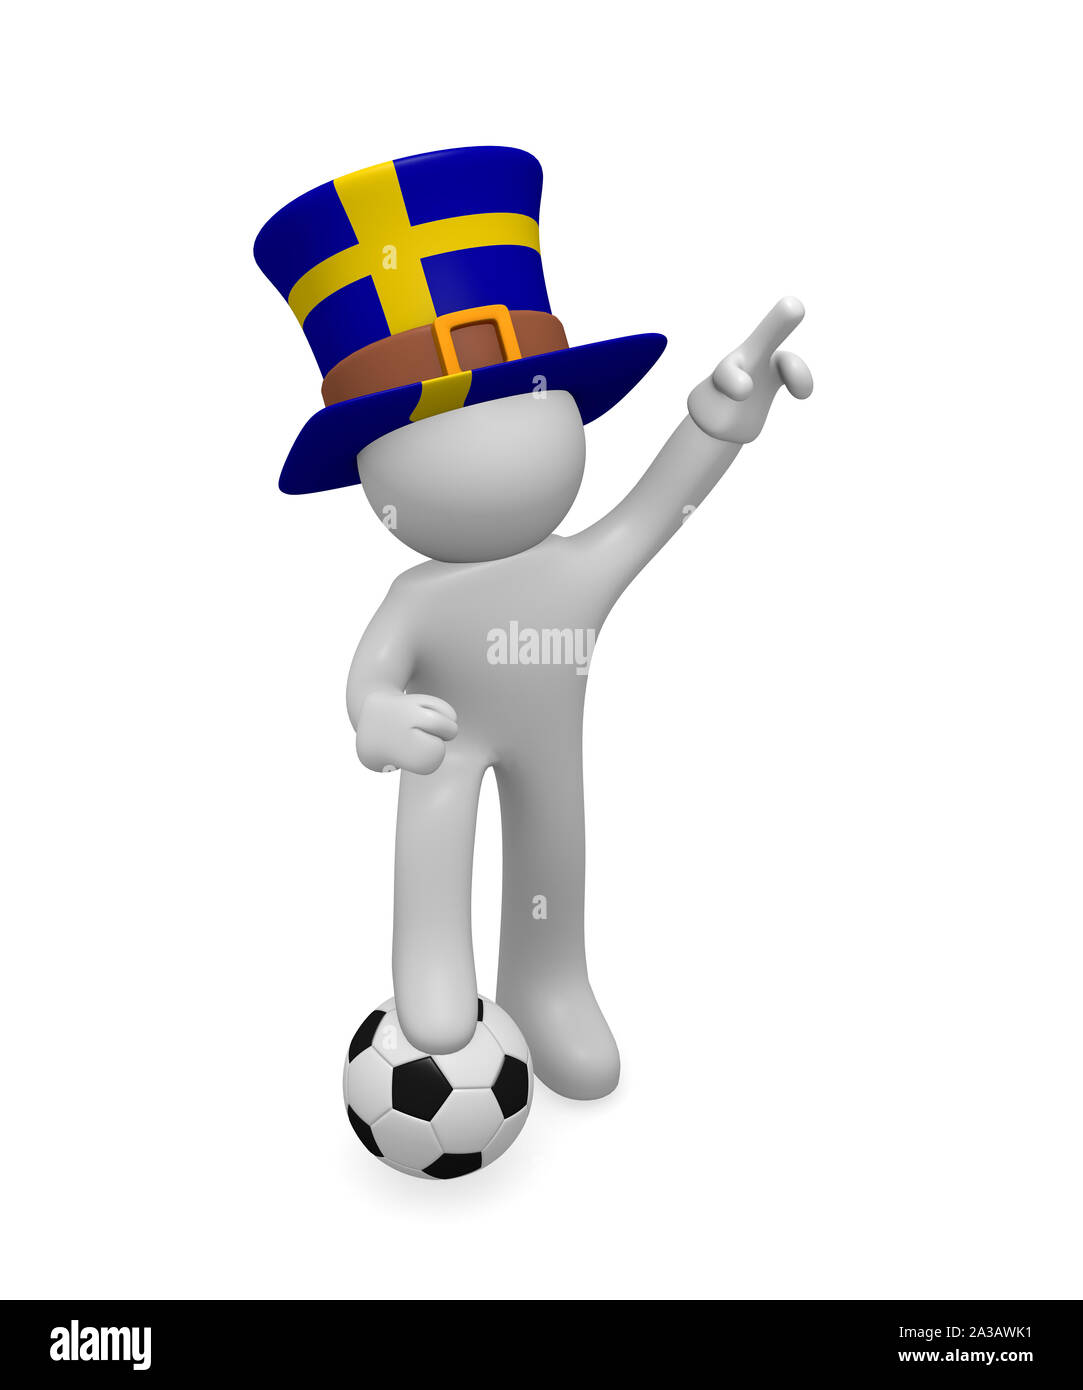 Small 3d soccer fan wearing a big hat with the flag of Sweden, 3d rendering Stock Photo